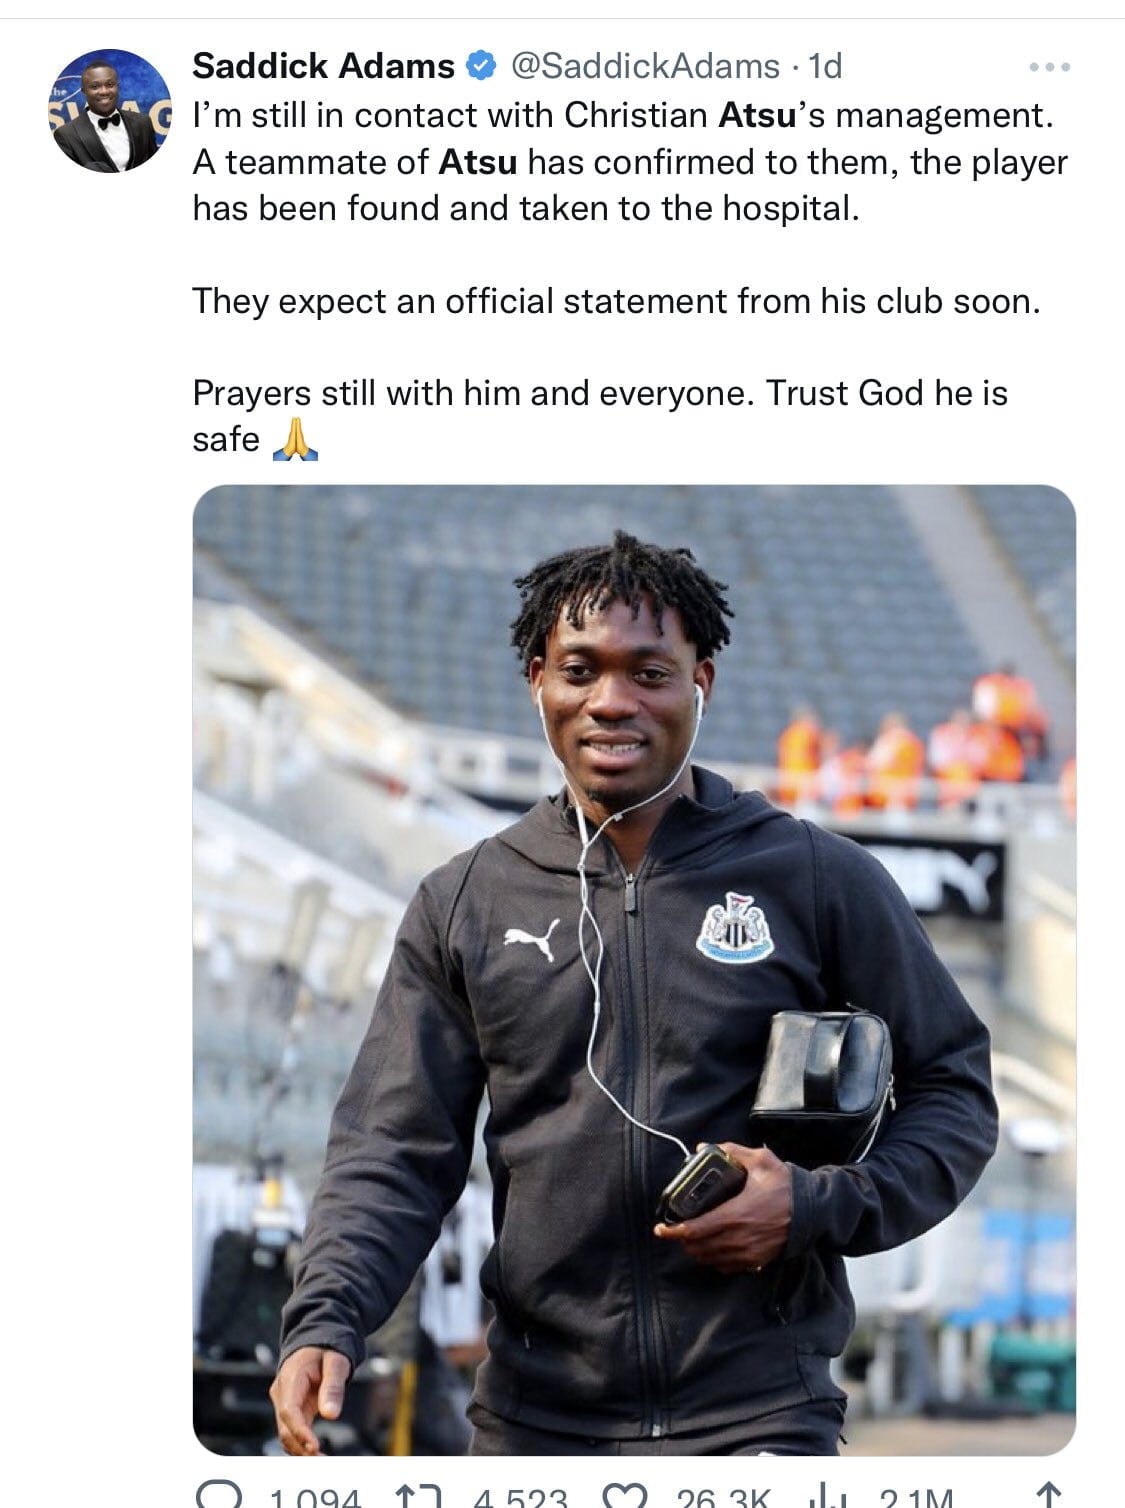 Christian Atsu: Hatayspor Official says there was a mistaken identify, player still not found